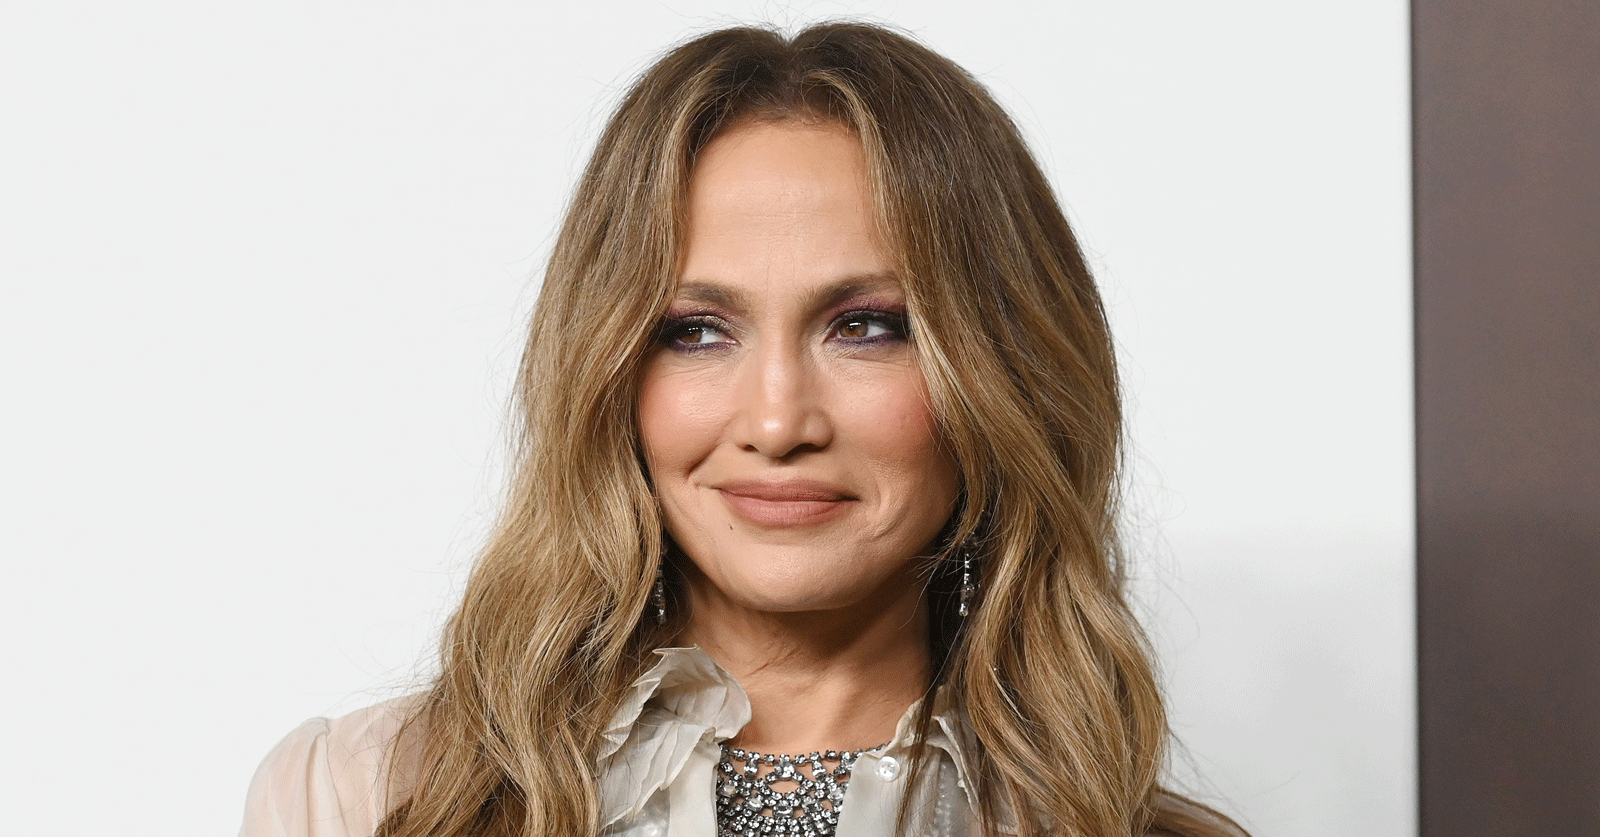 J.Lo Just Made This “Boring” Staple Look Party-Ready